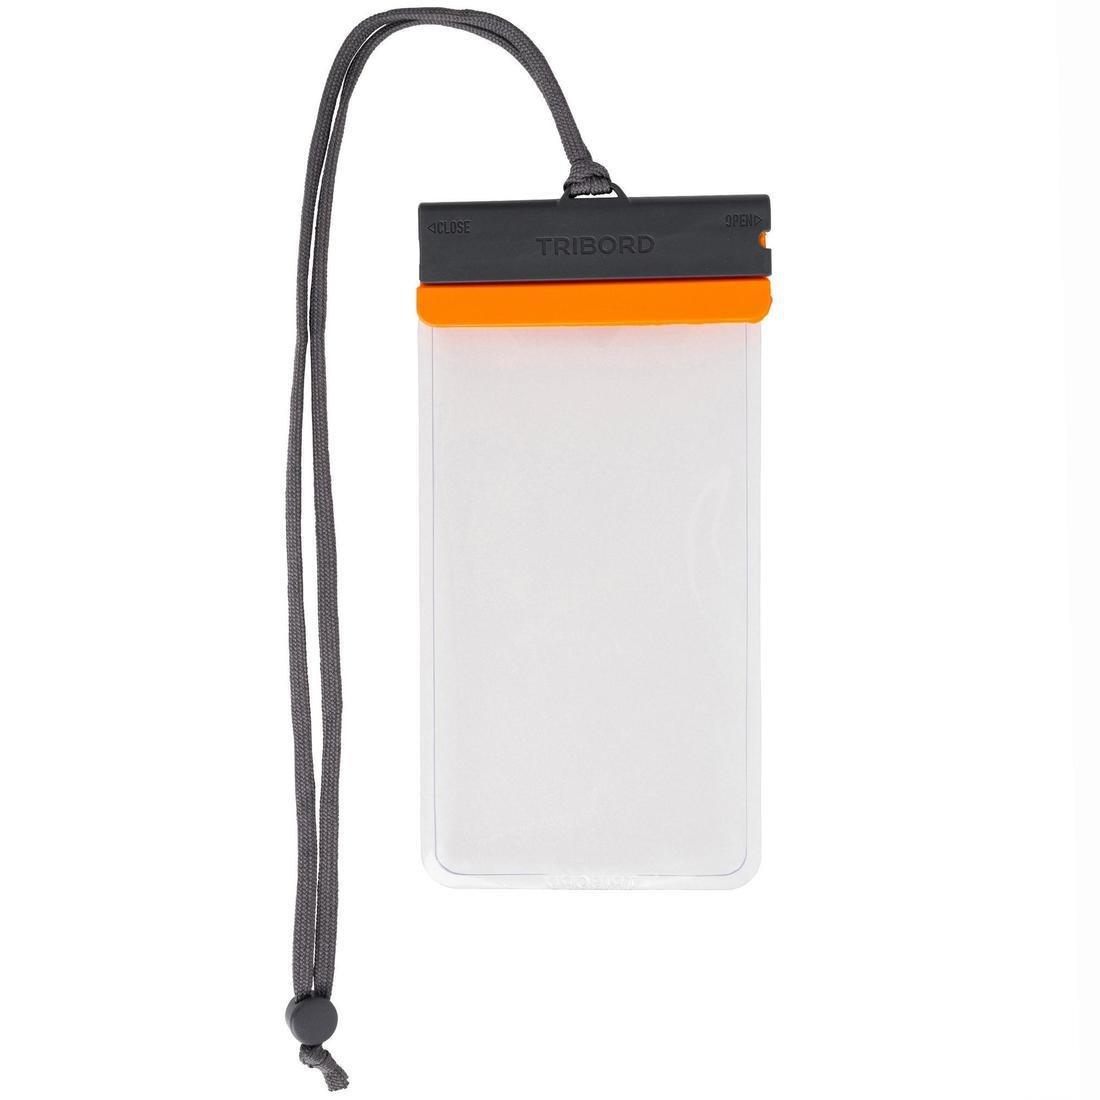 ITIWIT - Waterproof Phone Pouch, Colorless